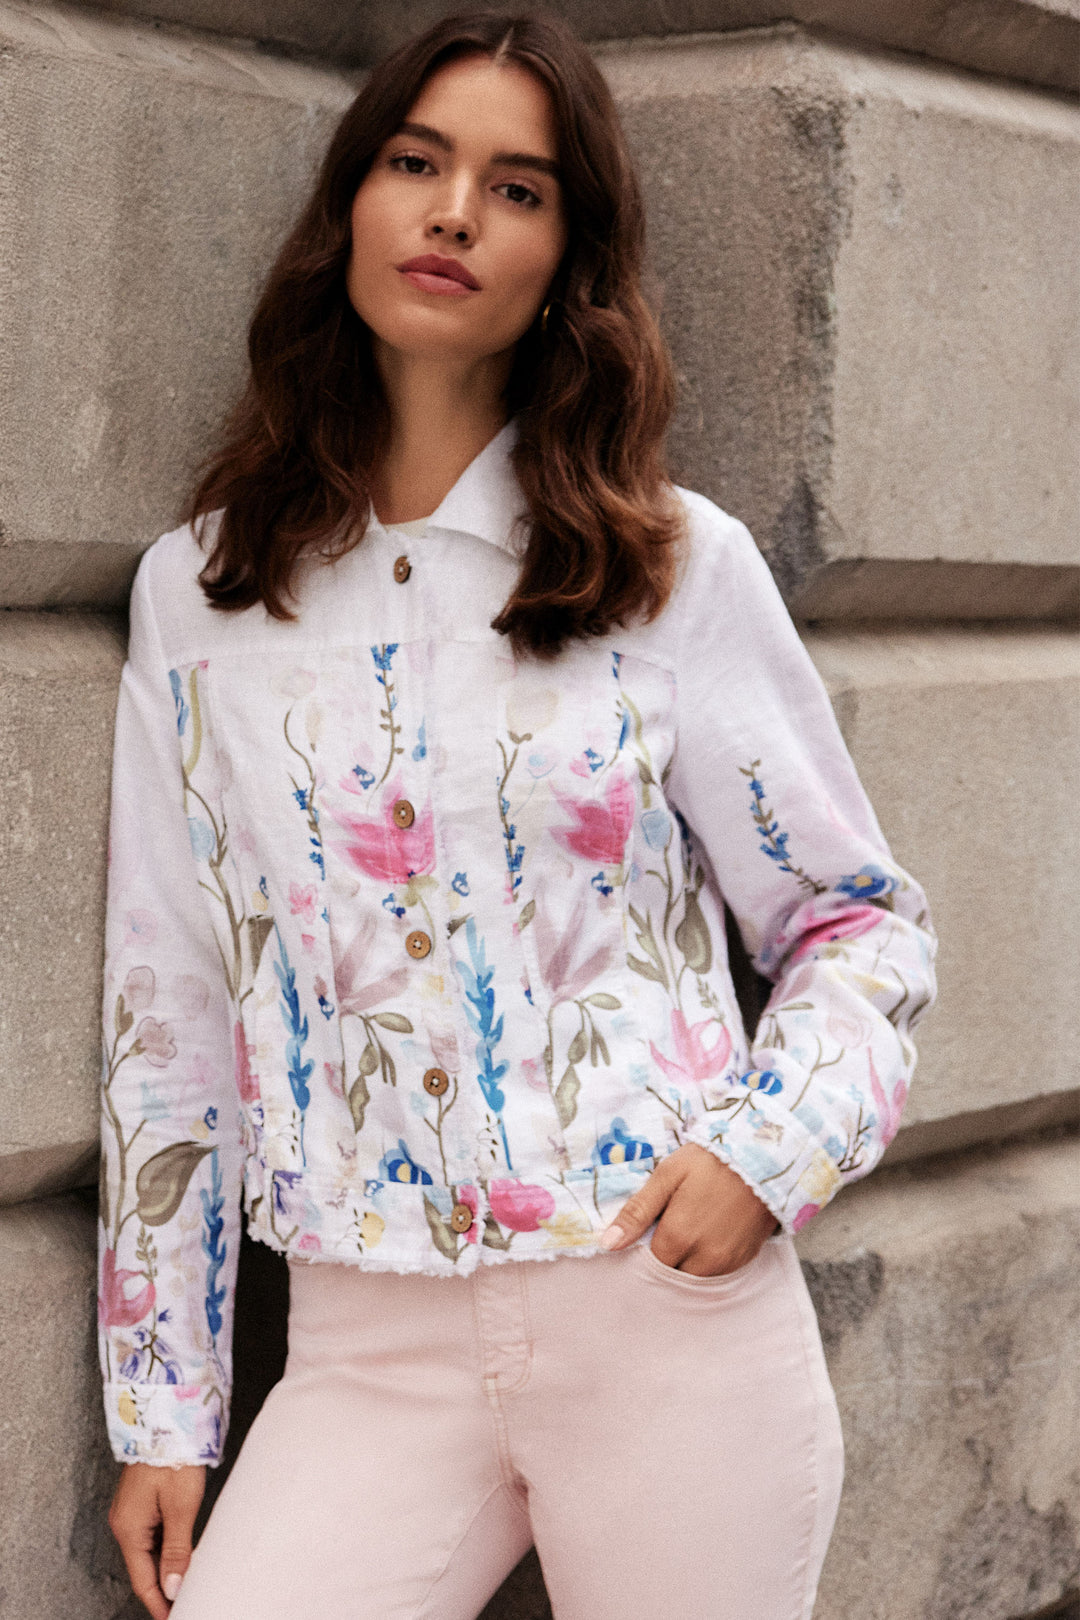 With a lovely floral print, frayed edges and front pockets, this jacket combines fashion and functionality.